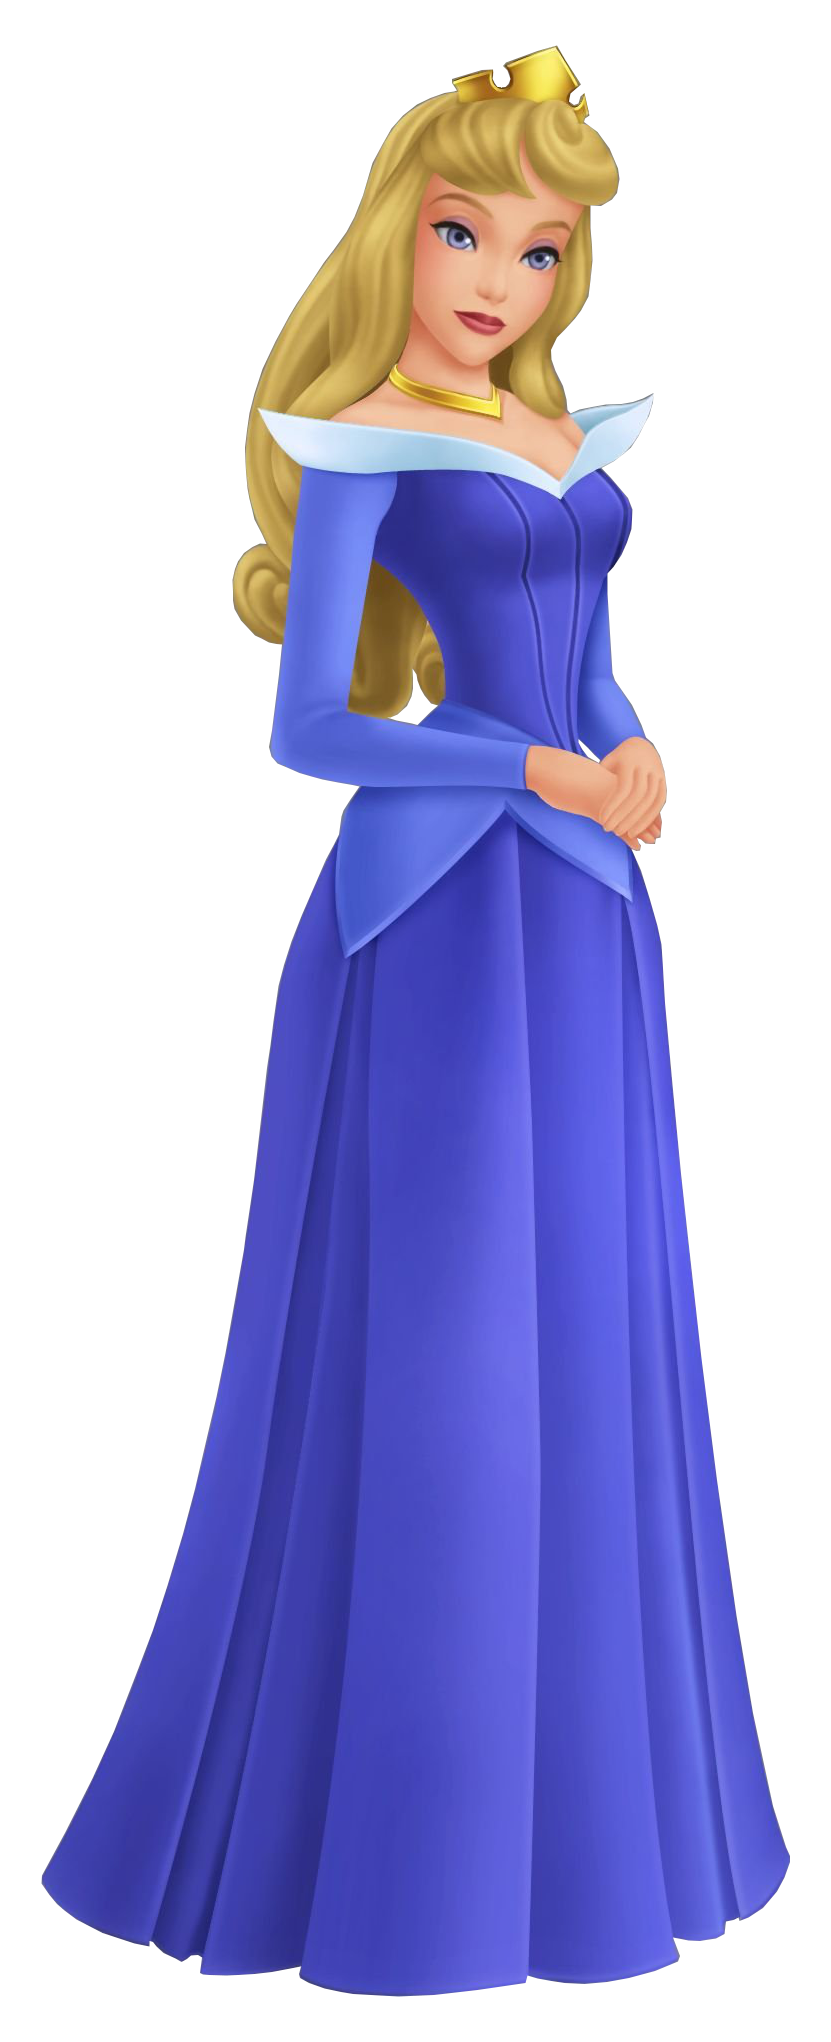 Disney with similarities to other heroes: Princess Aurora.